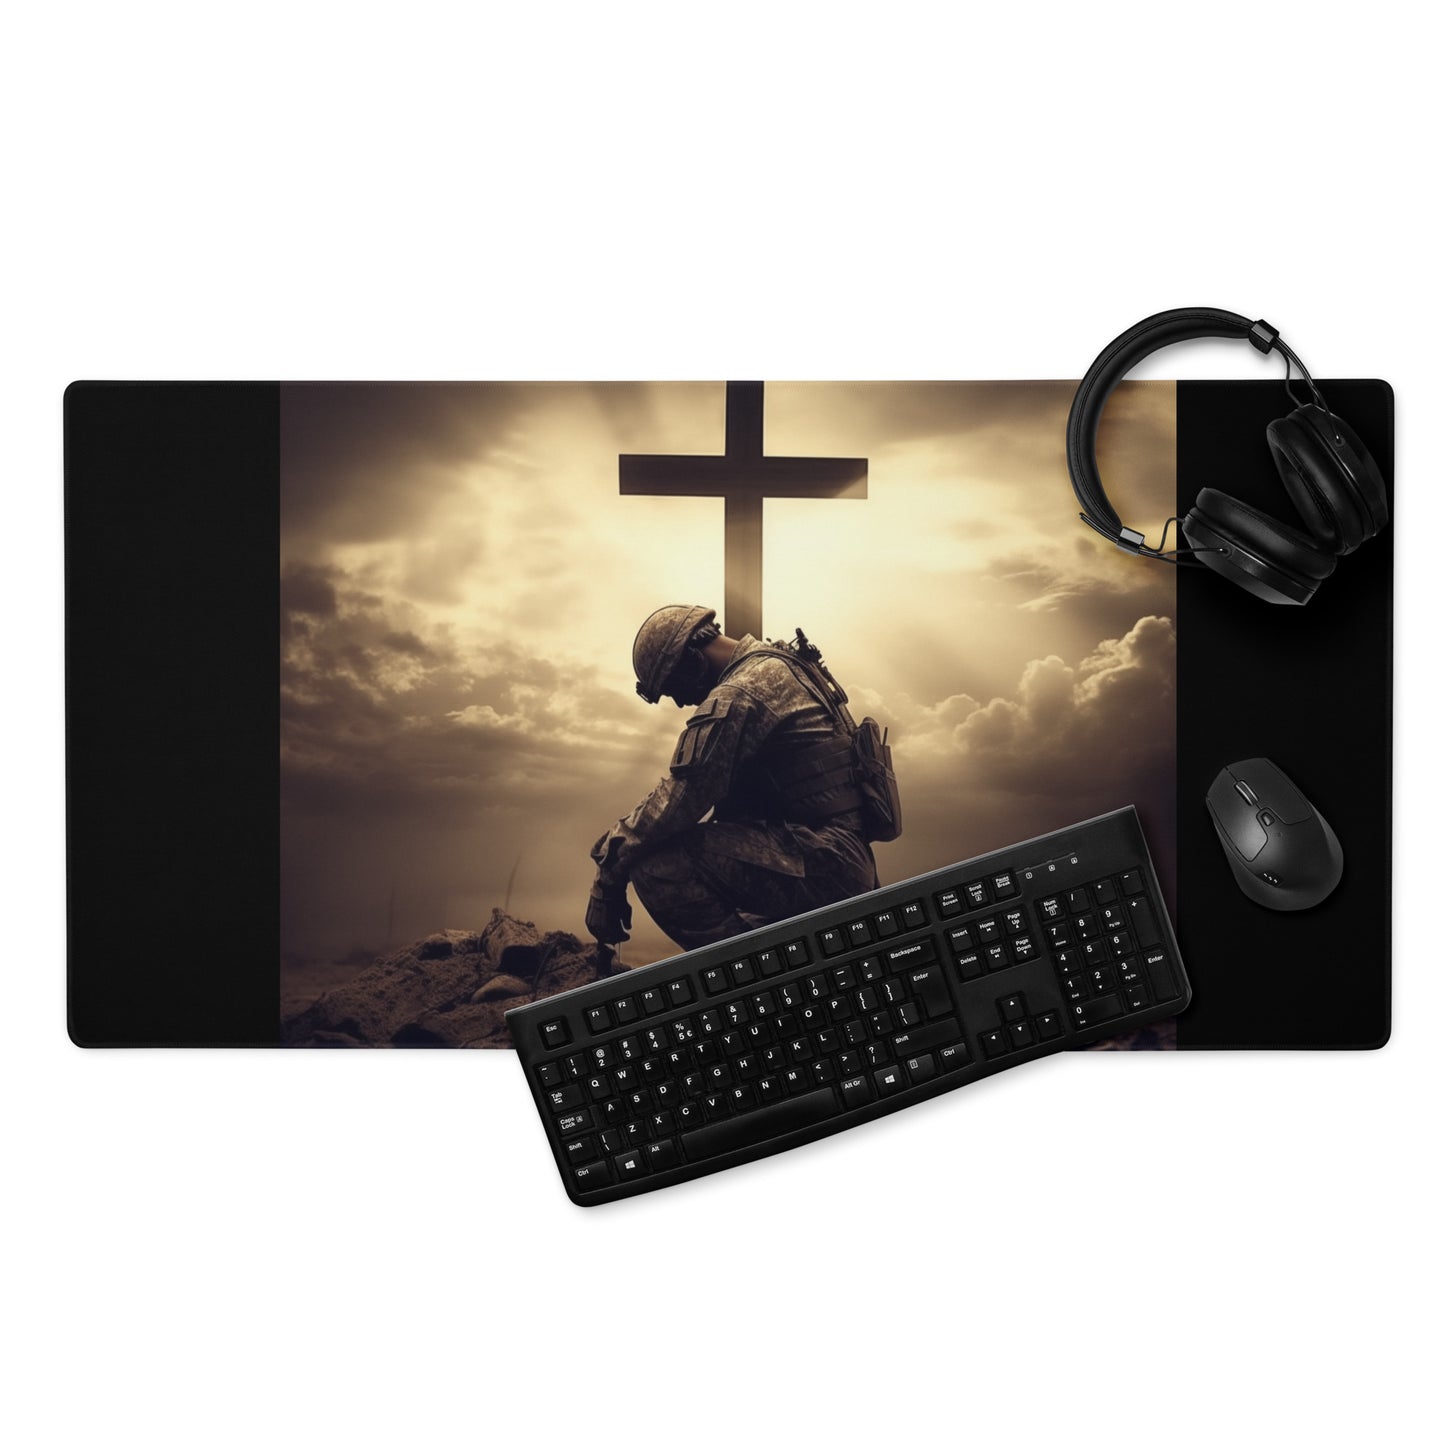 The Kneeling Soldier Gaming mouse pad